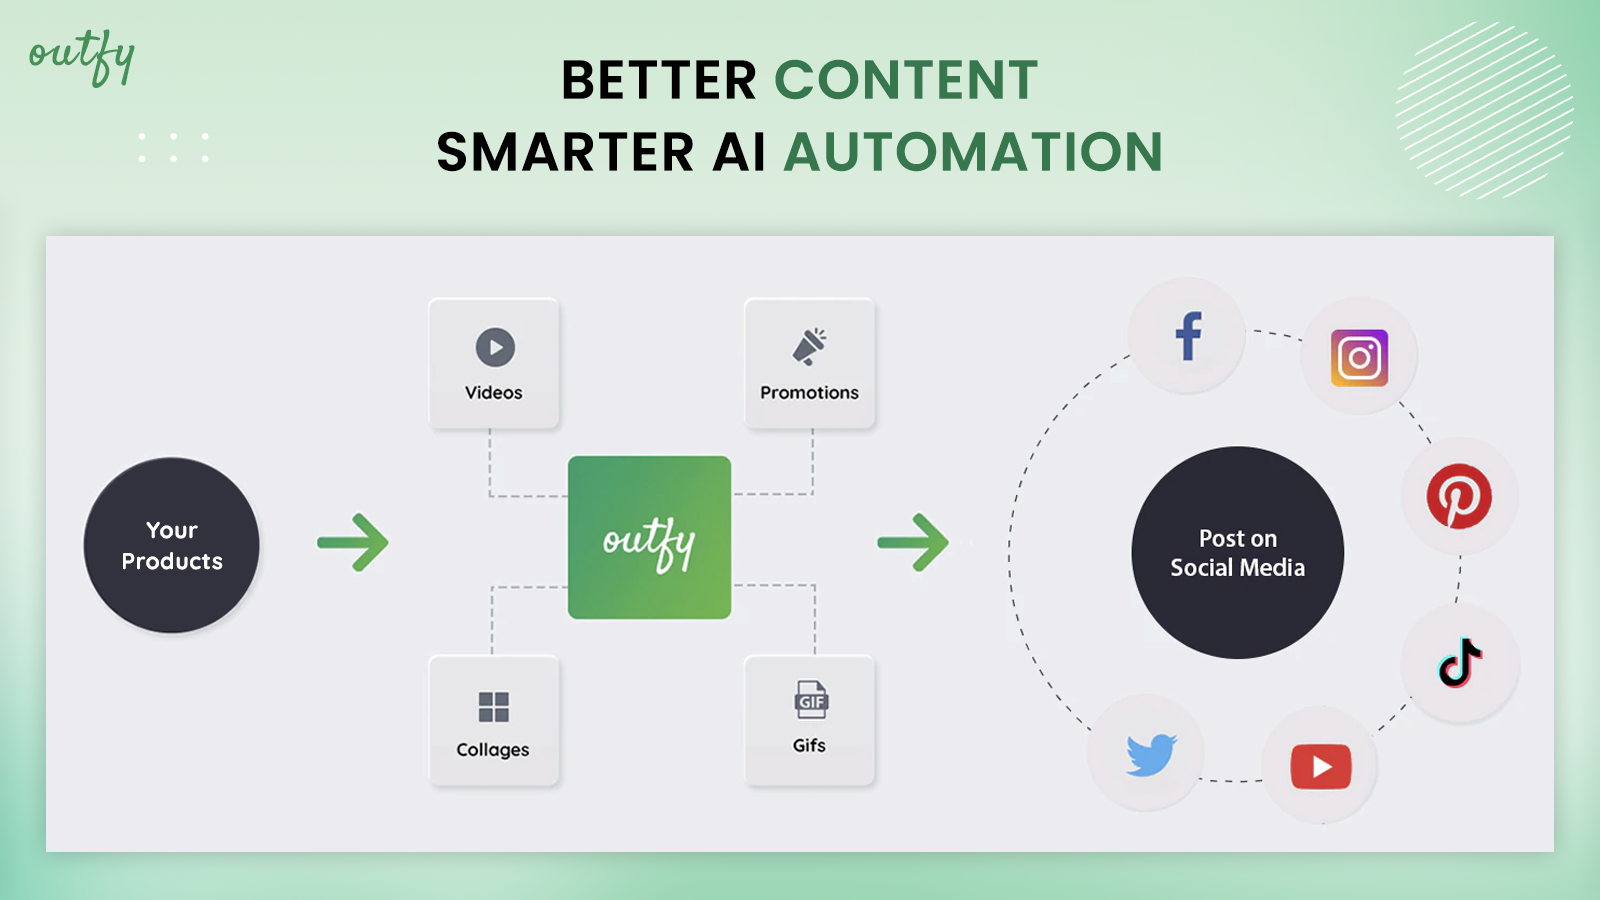 Better Content and Smarter AI Automation